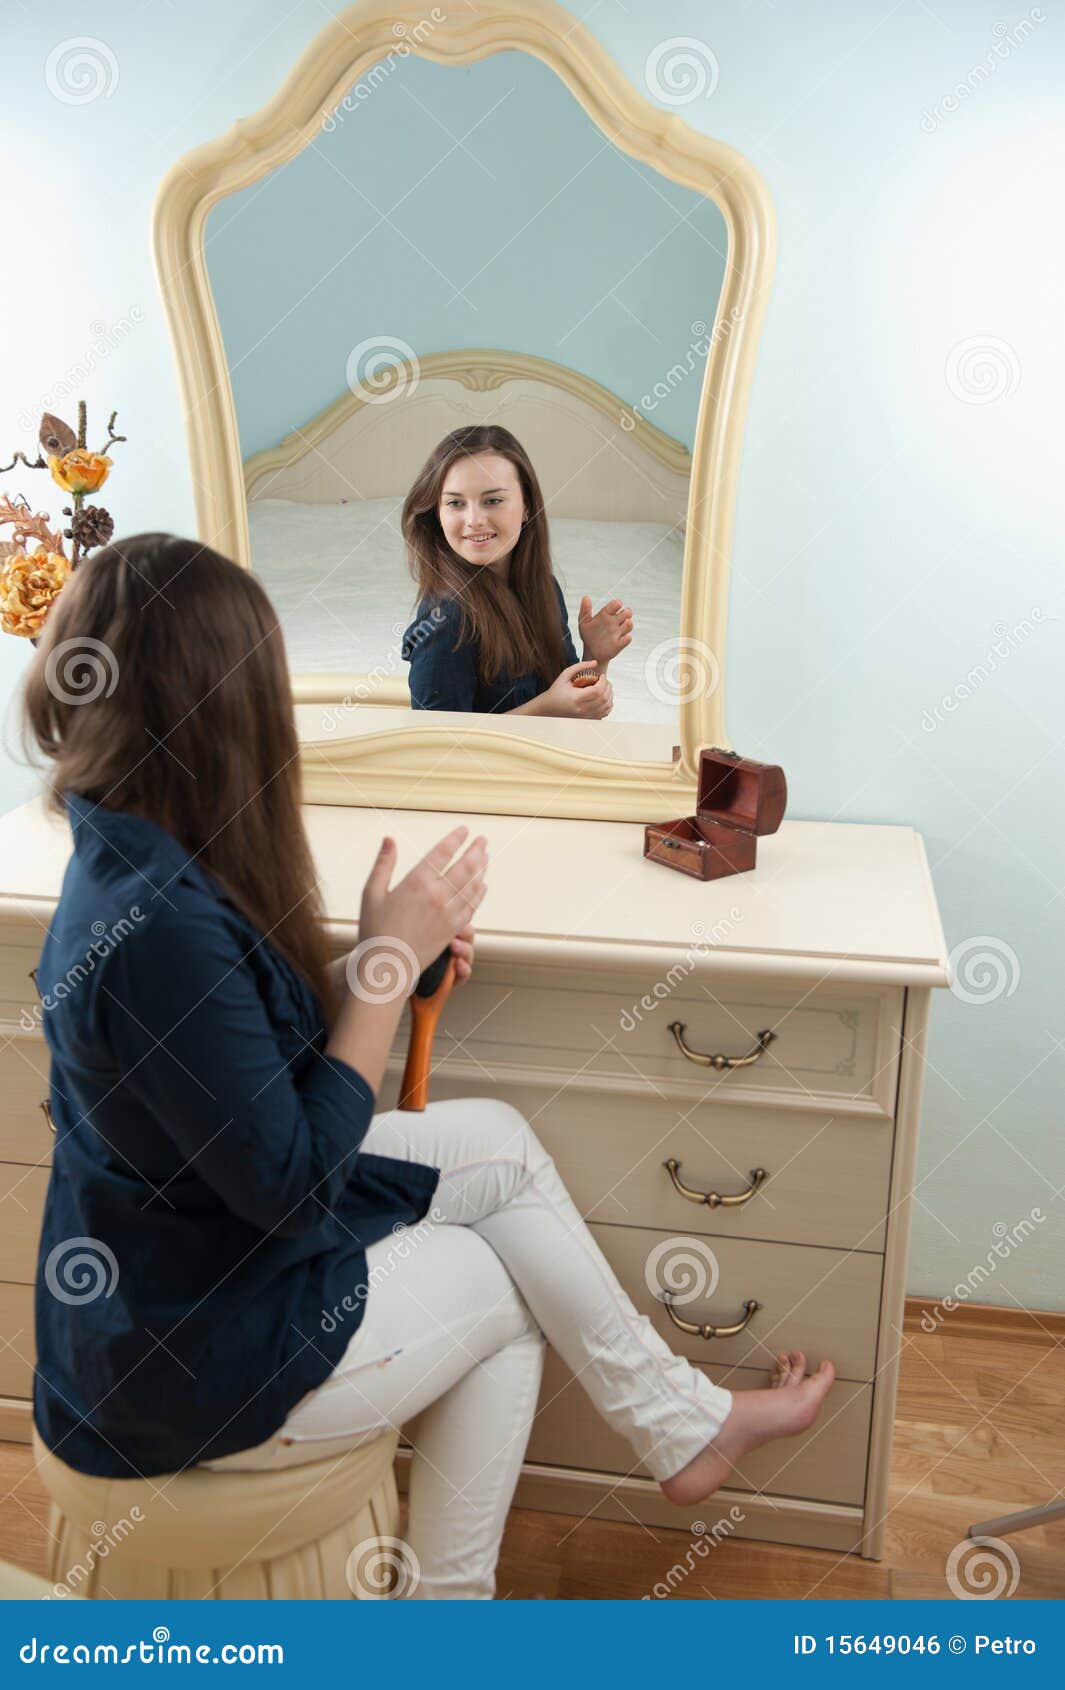 Woman In Front Of Mirror Royalty Free Stock Image - Image 